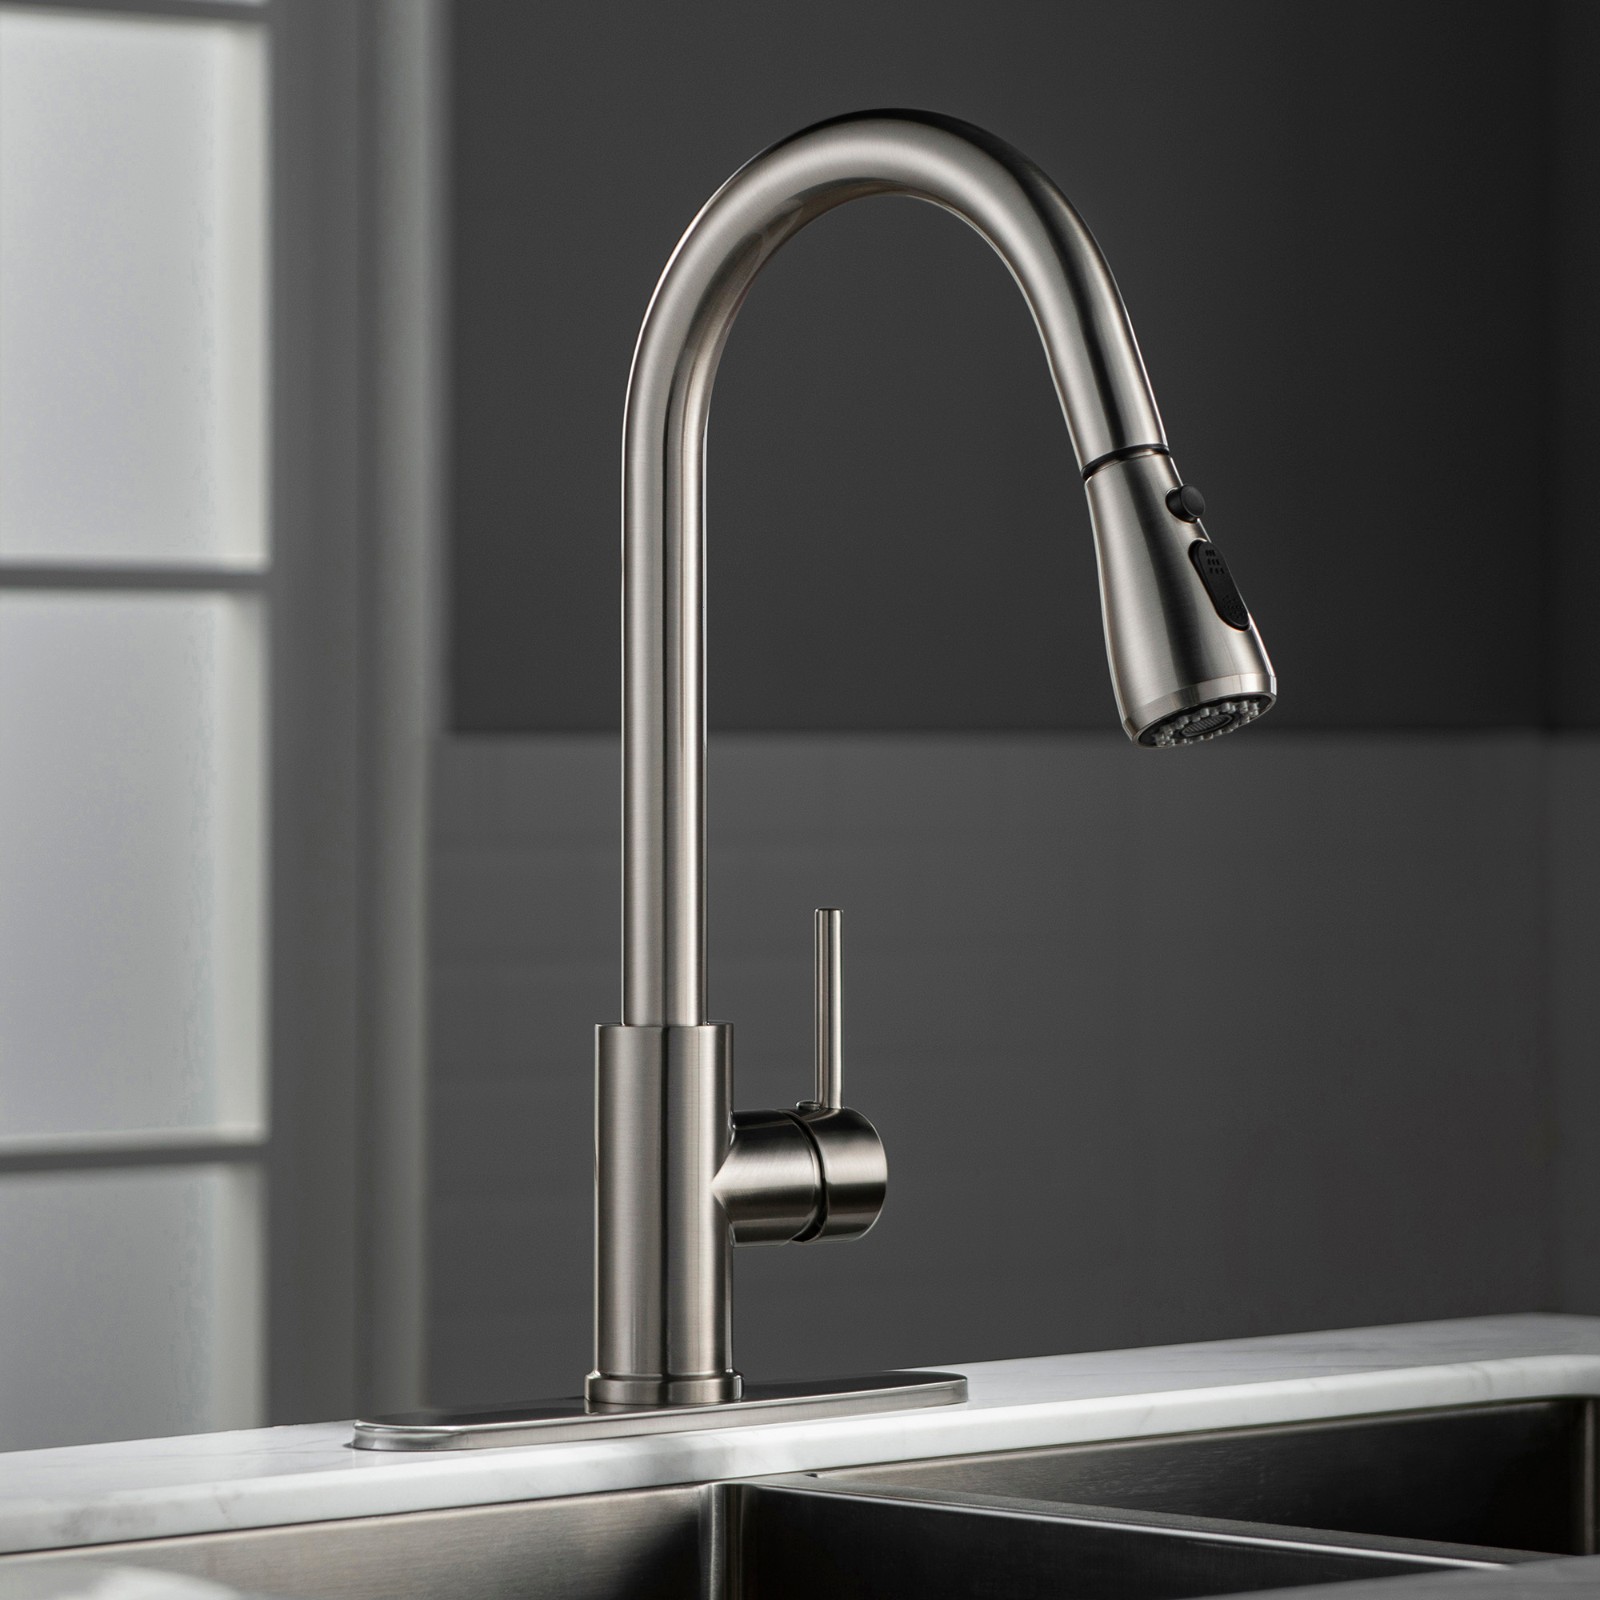  WOODBRIDGE WK090802BN Single Handle Pull Down Kitchen Faucet in Brushed Nickel Finish_5013